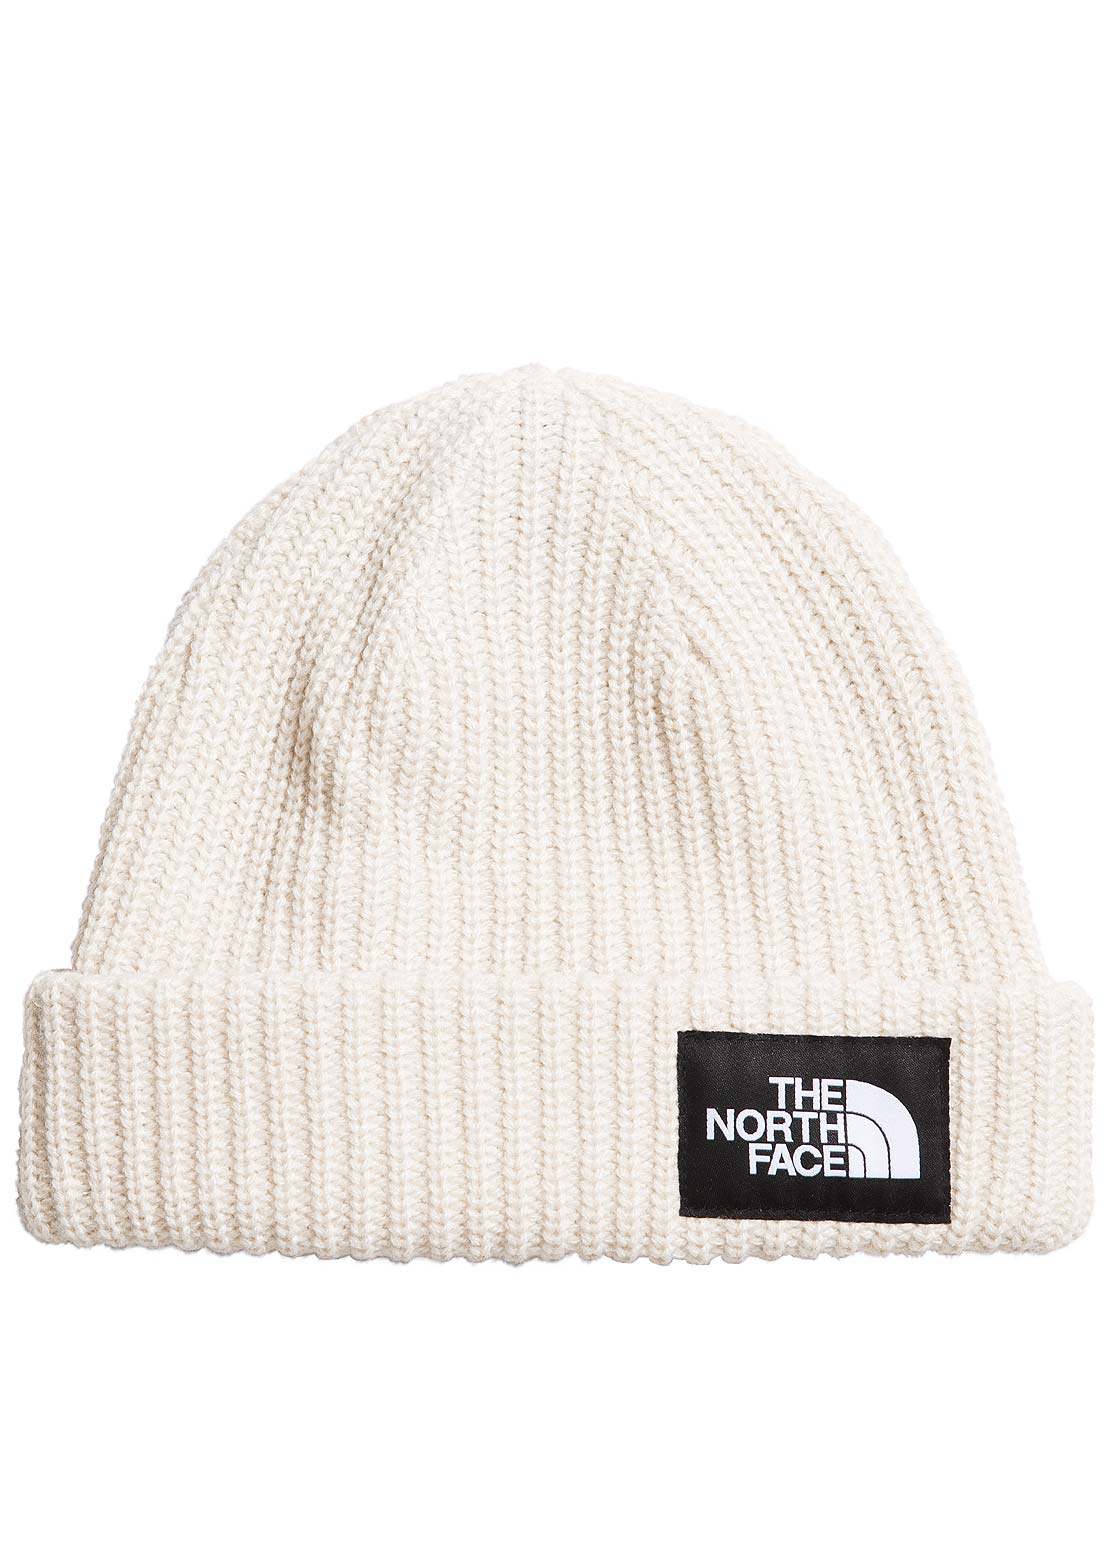 The North Face Junior Salty Dog Lined Beanie Gardenia White